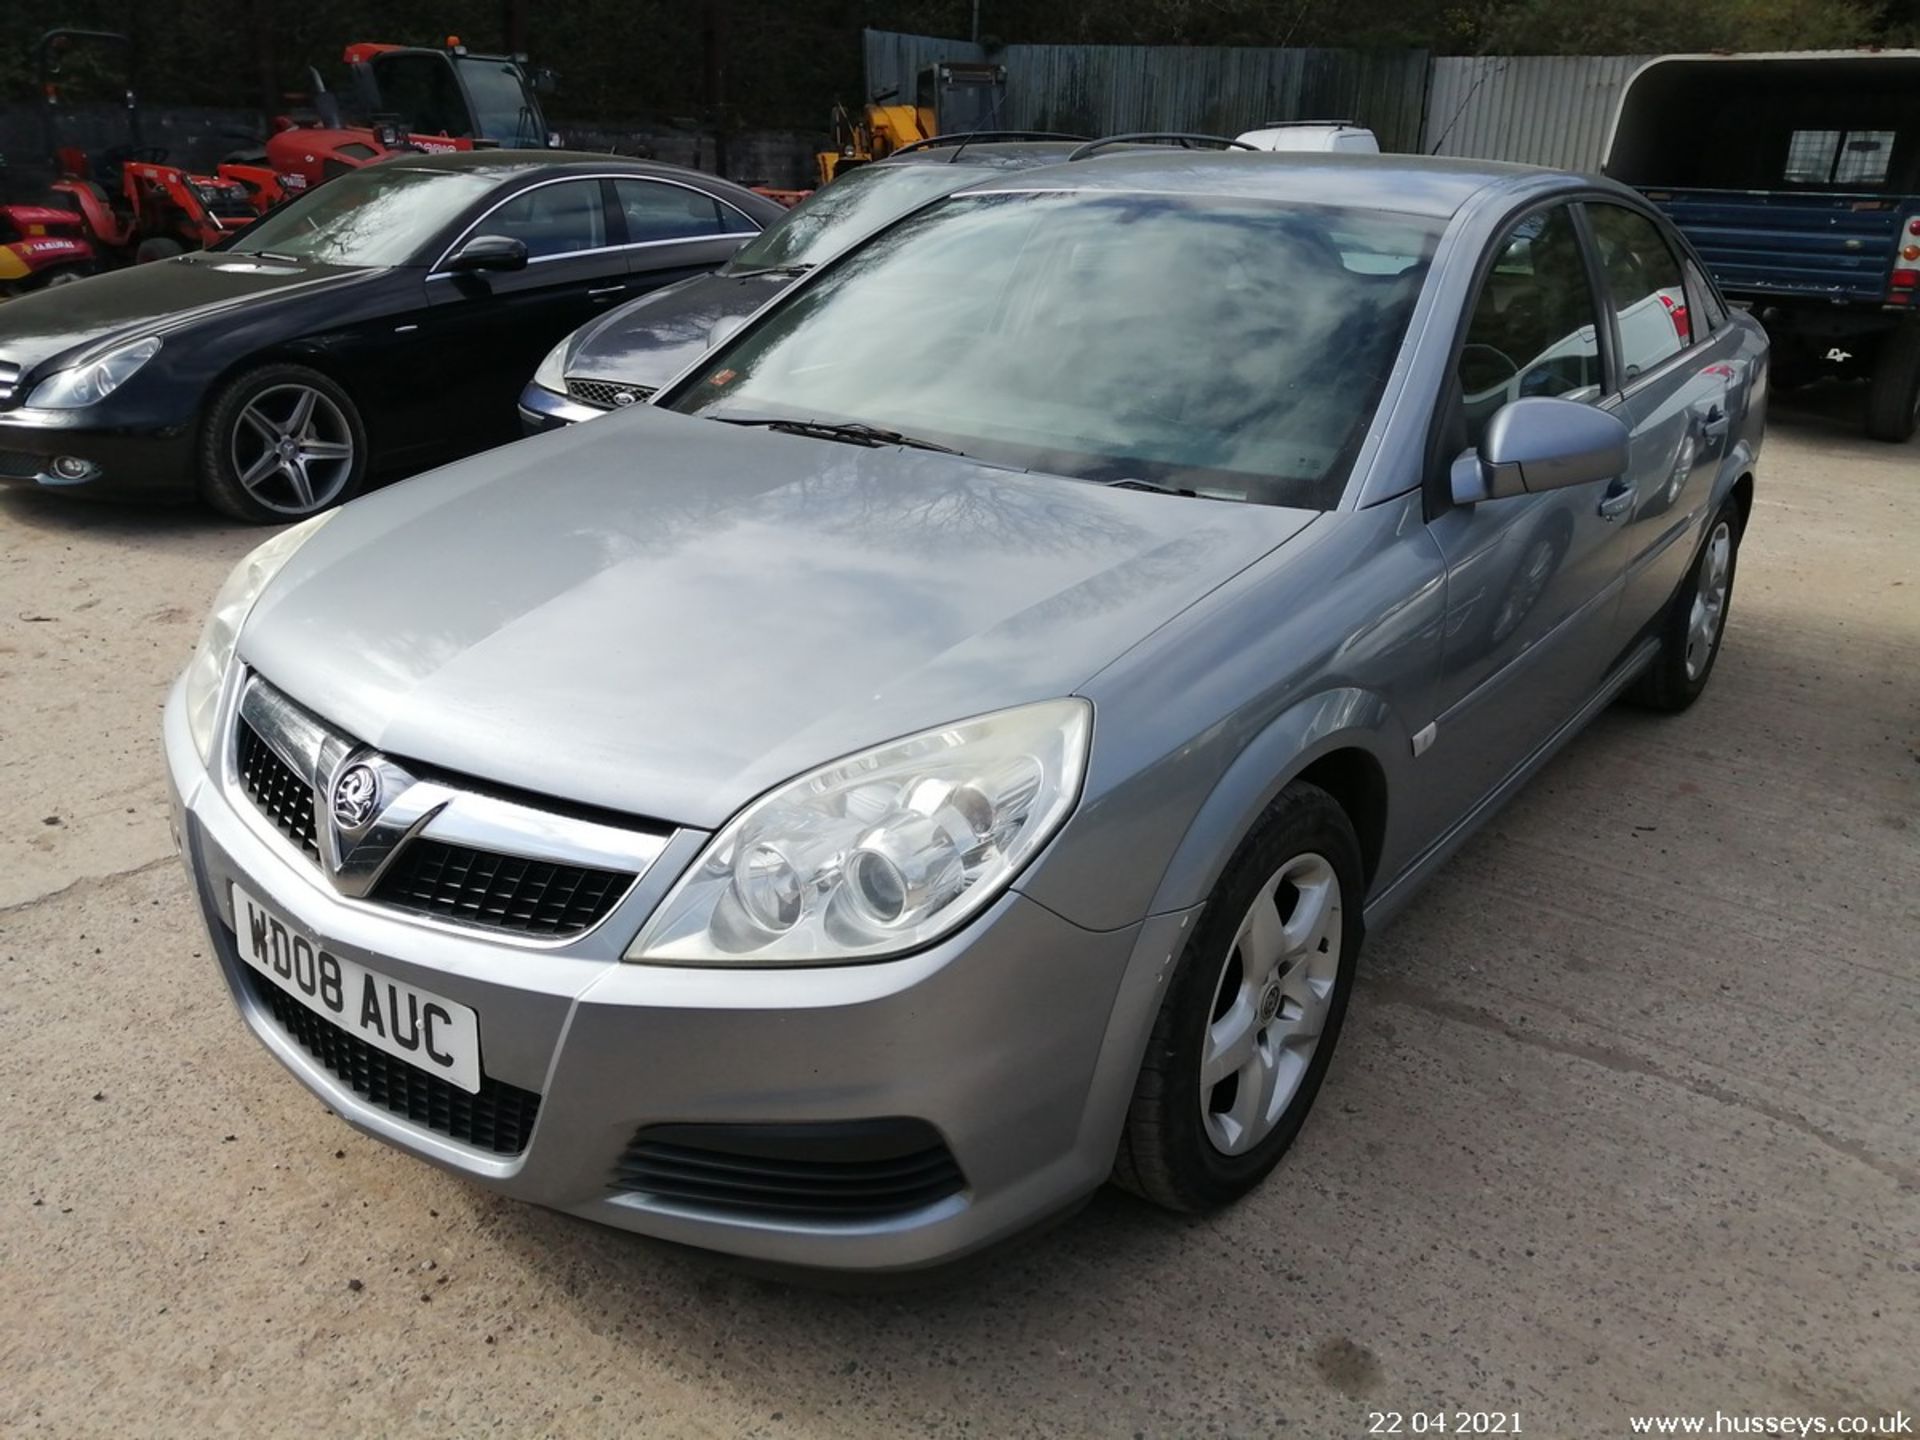 08/08 VAUXHALL VECTRA EXCLUSIV - 1796cc 5dr Hatchback (Silver) - Image 3 of 12